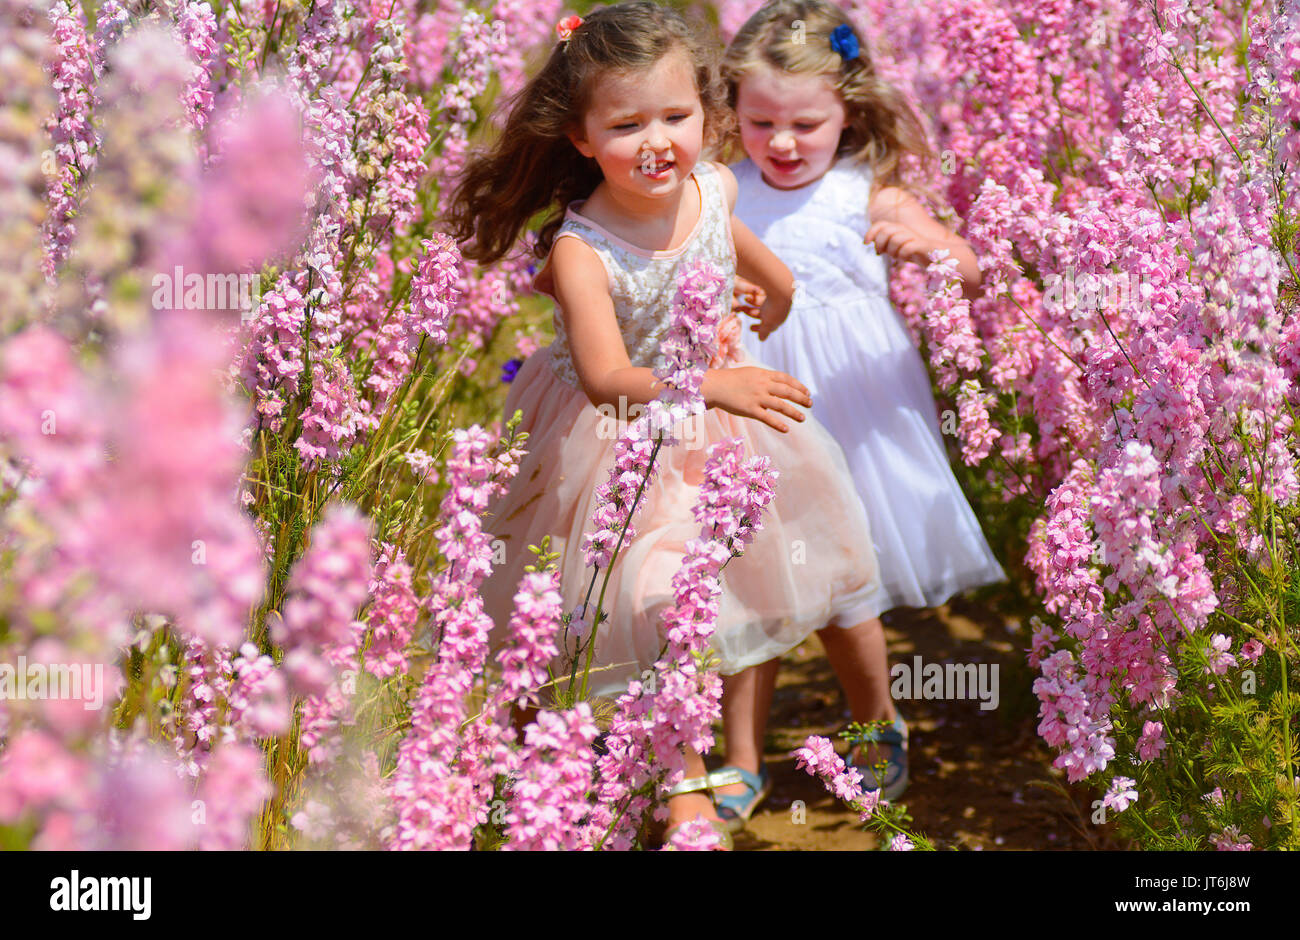 Blooming gorgeous weather- Friends Wren and Sienna, both 3 yrs old, amongst the delphiniums at the Confetti Field in Wick, Worcestershire today- one of the world's largest carpets of flowers where today it reached 28 degrees C. The 18 acres of delphiniums are currently being picked for confetti by The Real Flower Confetti Company. Photos by John Robertson, 6th July 2017. Stock Photo